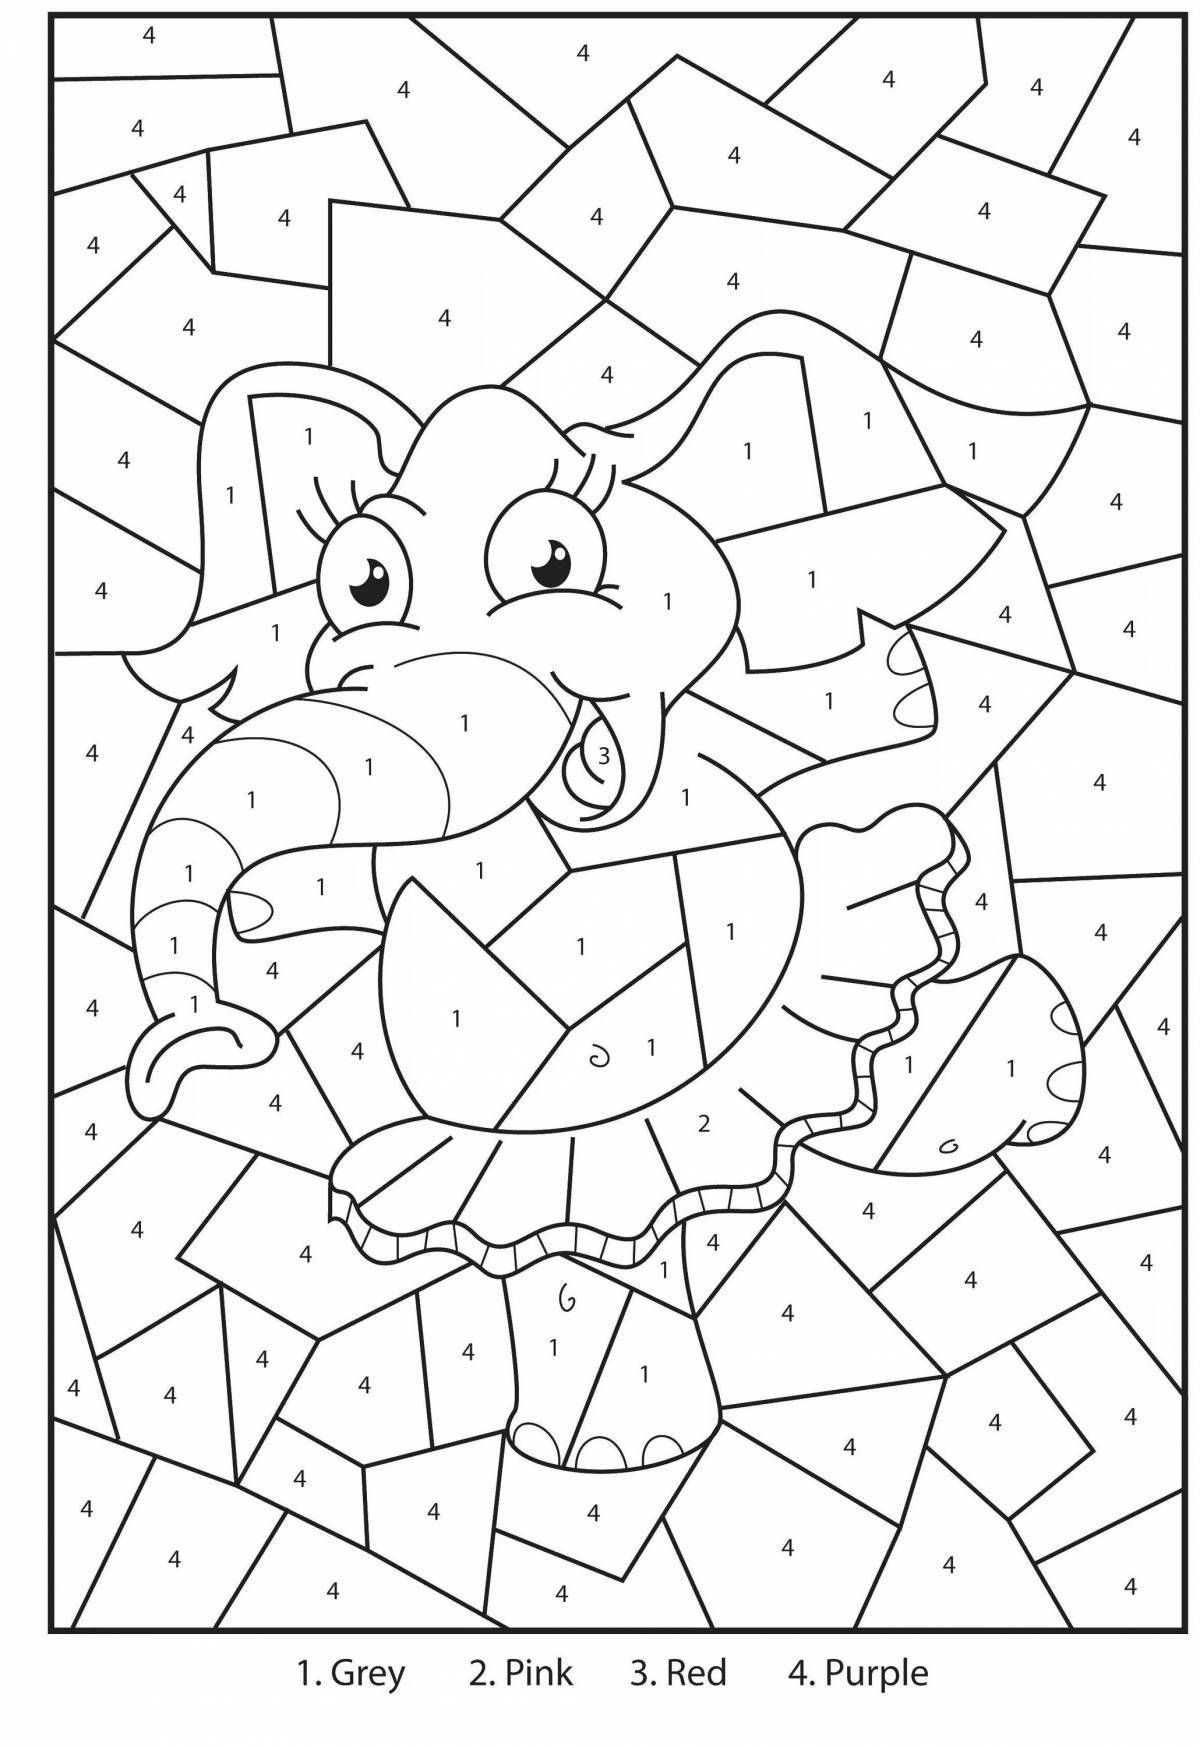 Attractive coloring pages of mosaic figurines